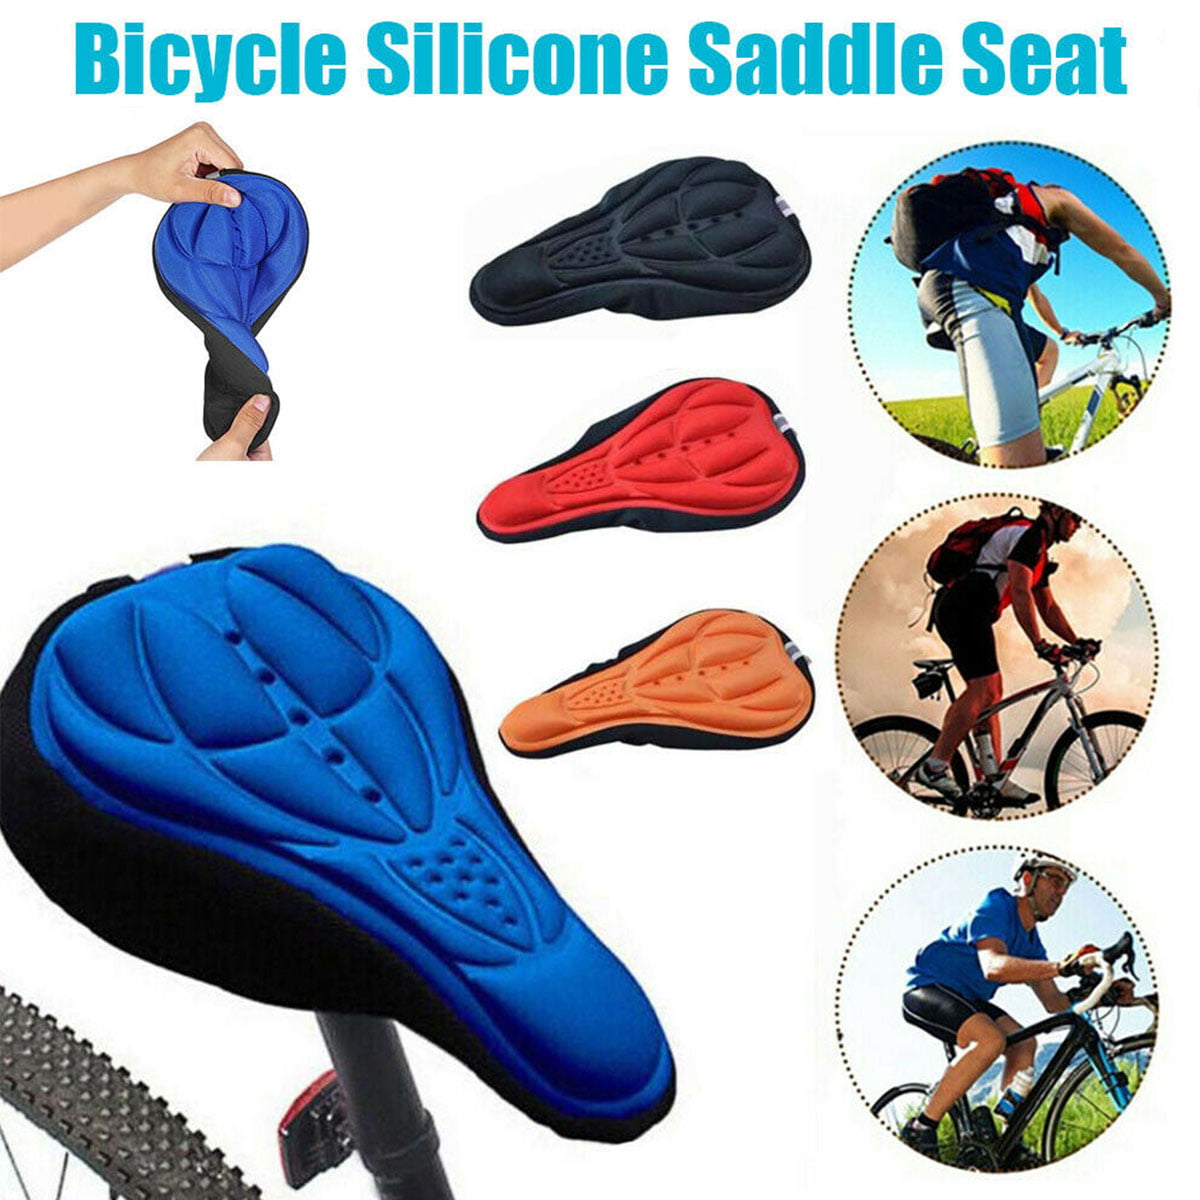 Cycling Bike Silicone 3D Gel Saddle Seat Cover Pad Padded Soft Cushion Comfort 